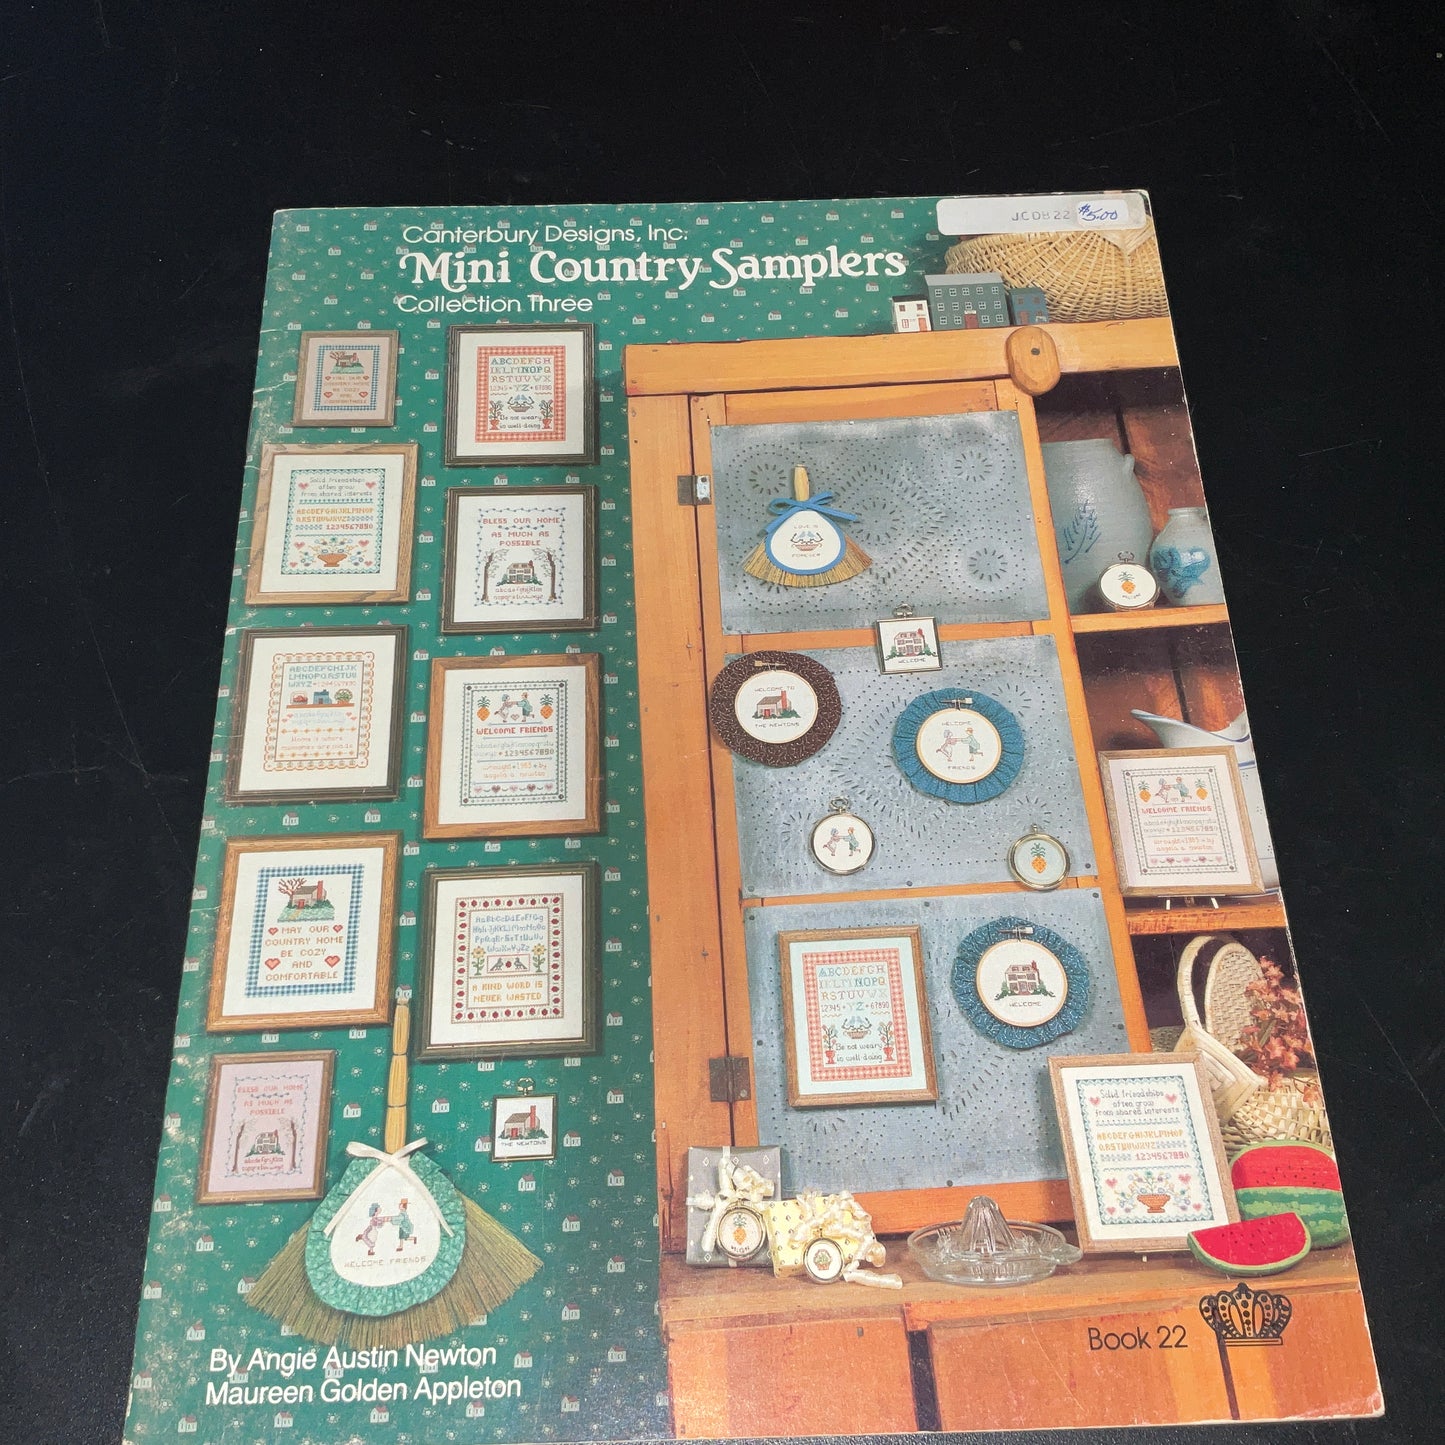 Canterbury Designs Inc set of 2 Mini Country Samplers Collections Two & Three vintage 1984 counted cross stitch charts